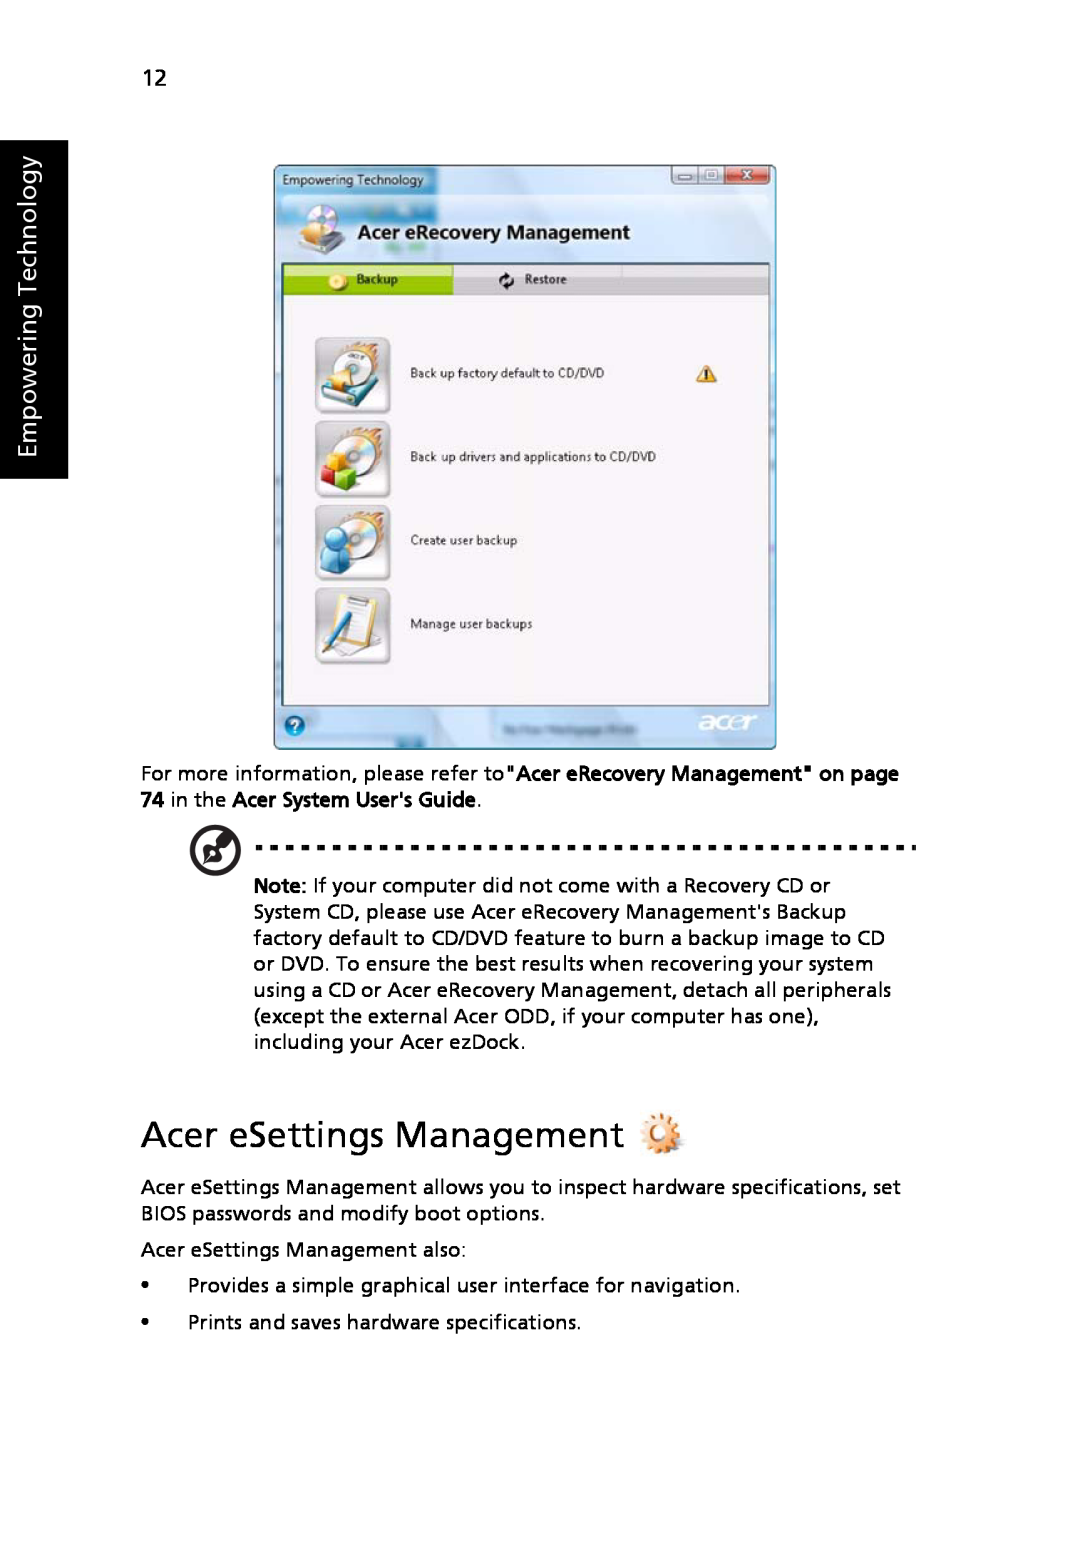 Acer 8920 Series, LE1 manual Acer eSettings Management, Empowering Technology 